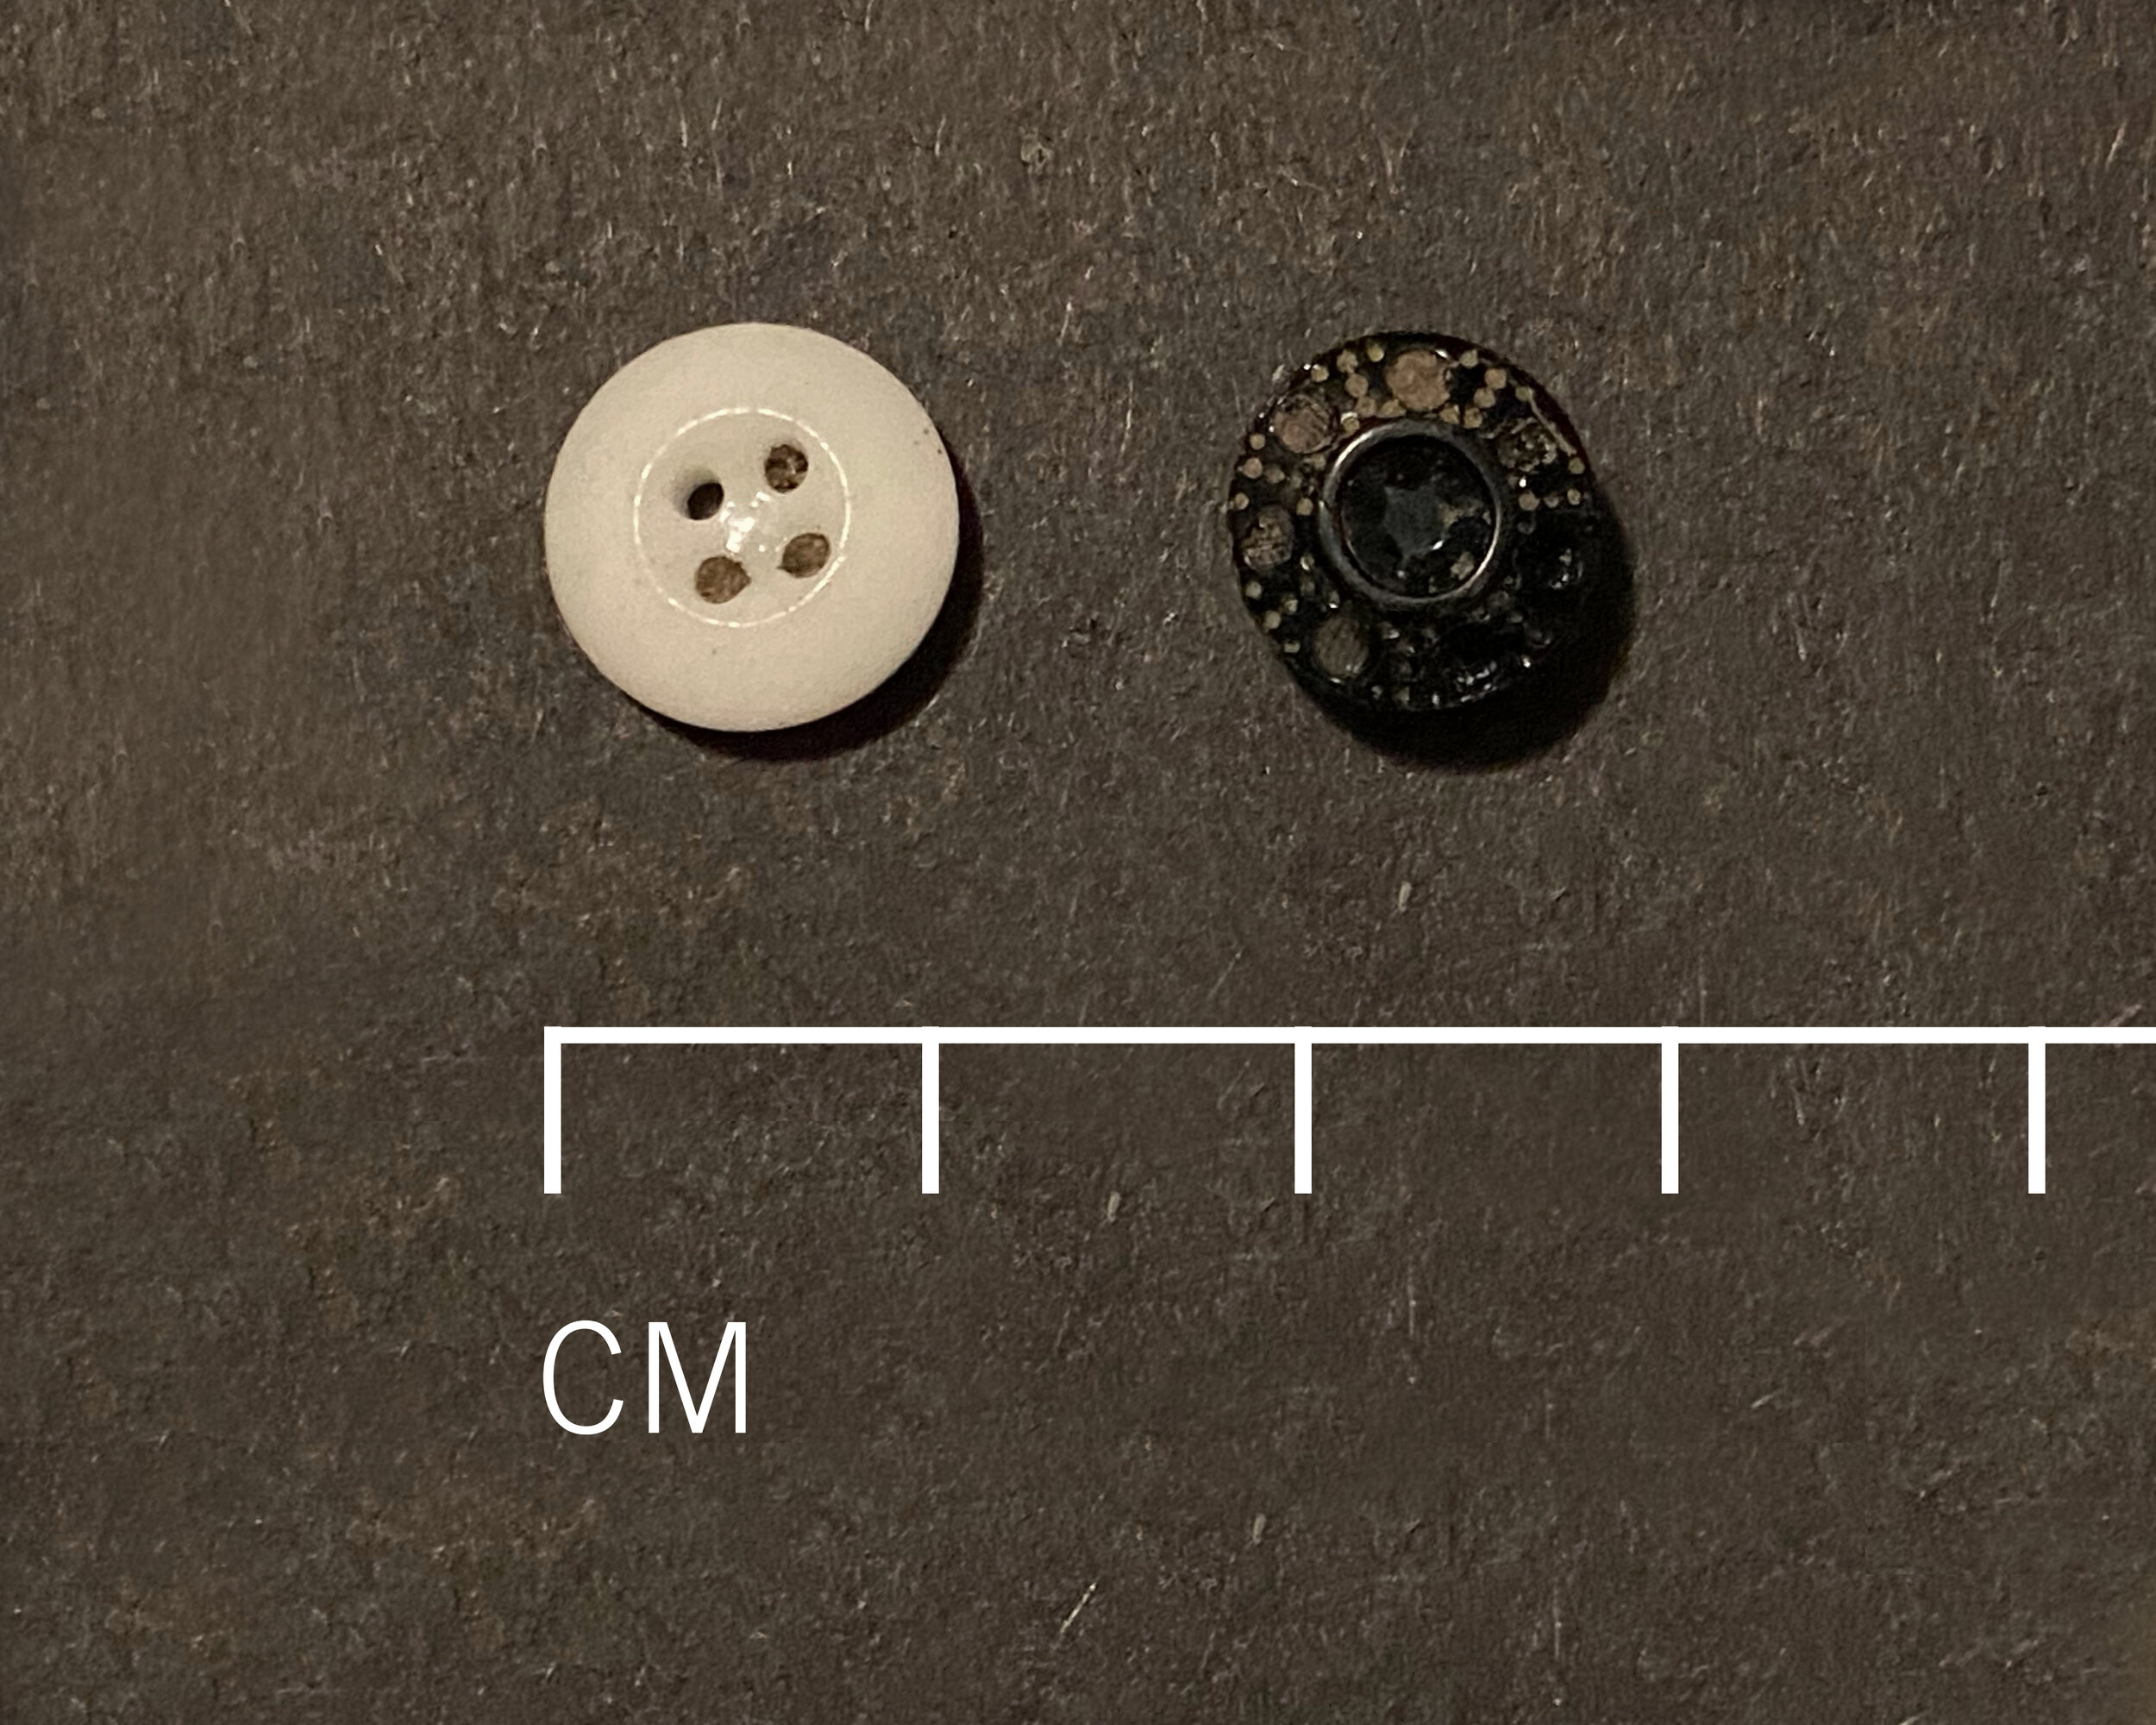   Buttons recovered during archaeological investigation.  Courtesy of Allison McGovern 